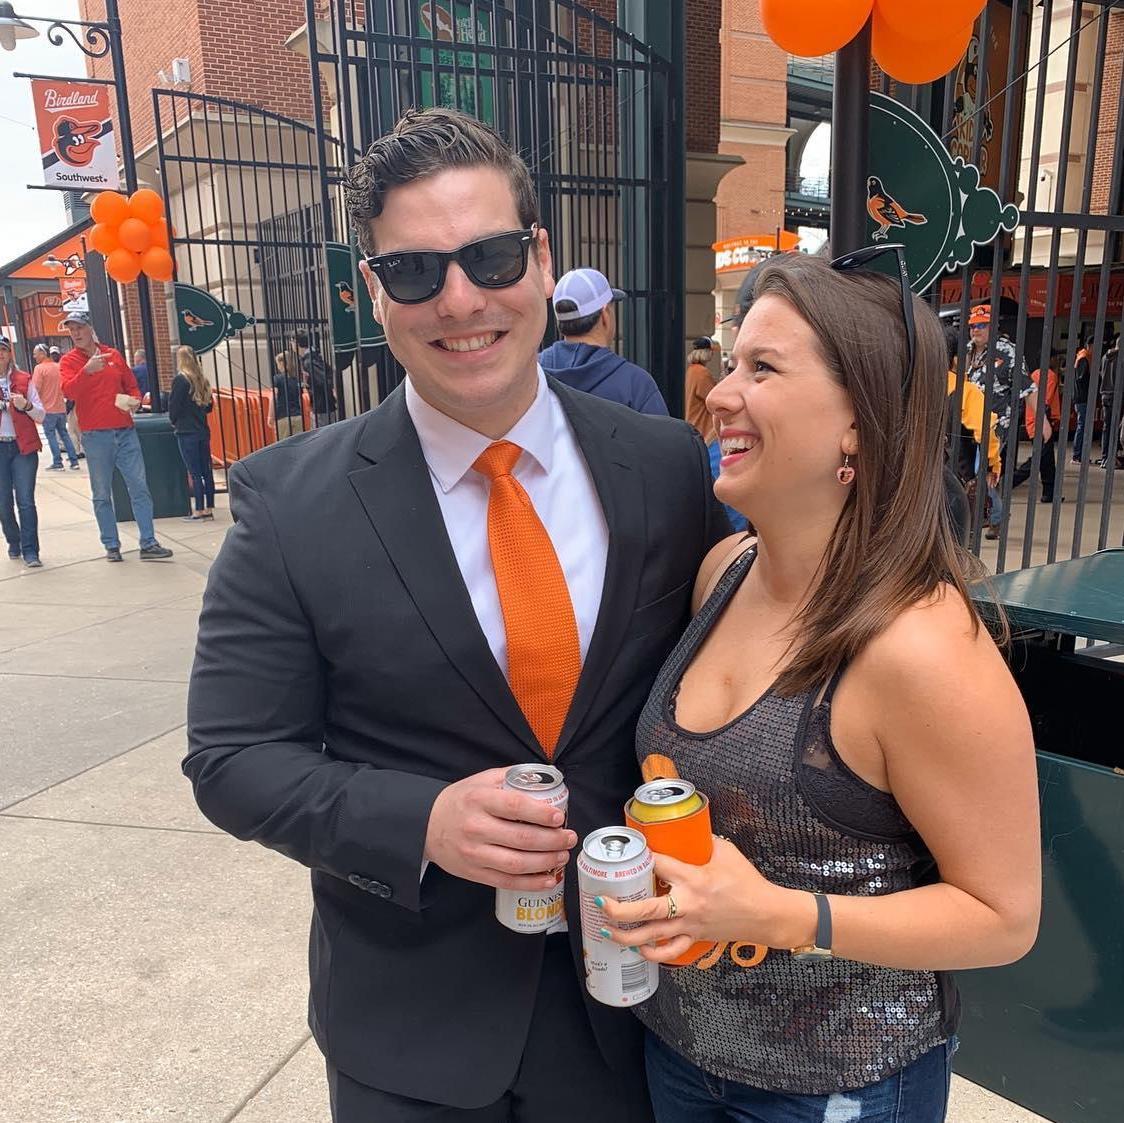 Our first O's Opening Day together